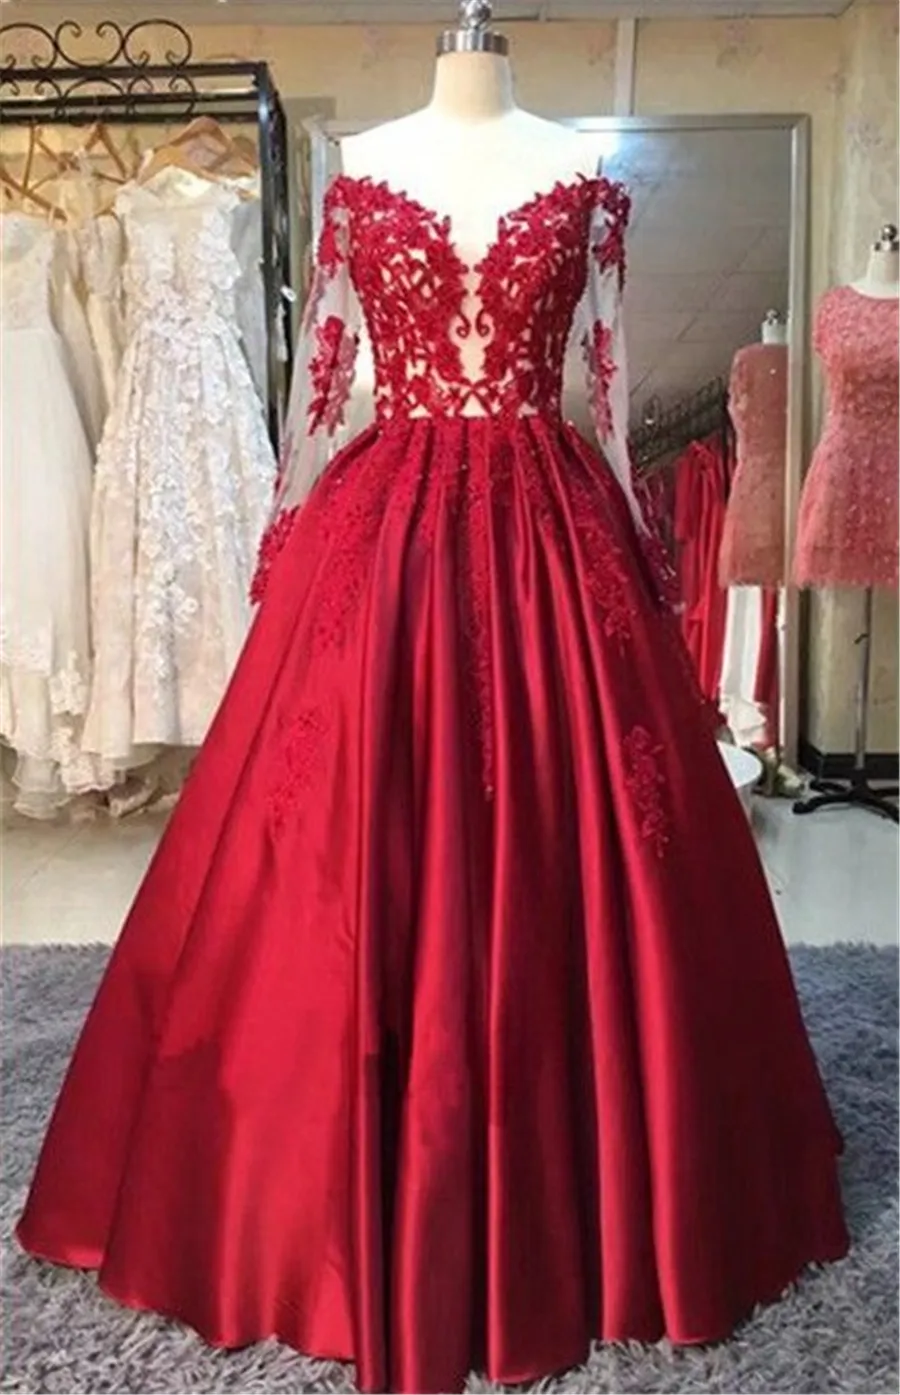 Lace Appliques OfftheShoulder Puffy Red Long Sleeves Prom Dresses See Through Matte Satin Evening Dress vestidos largos de fiest6640848